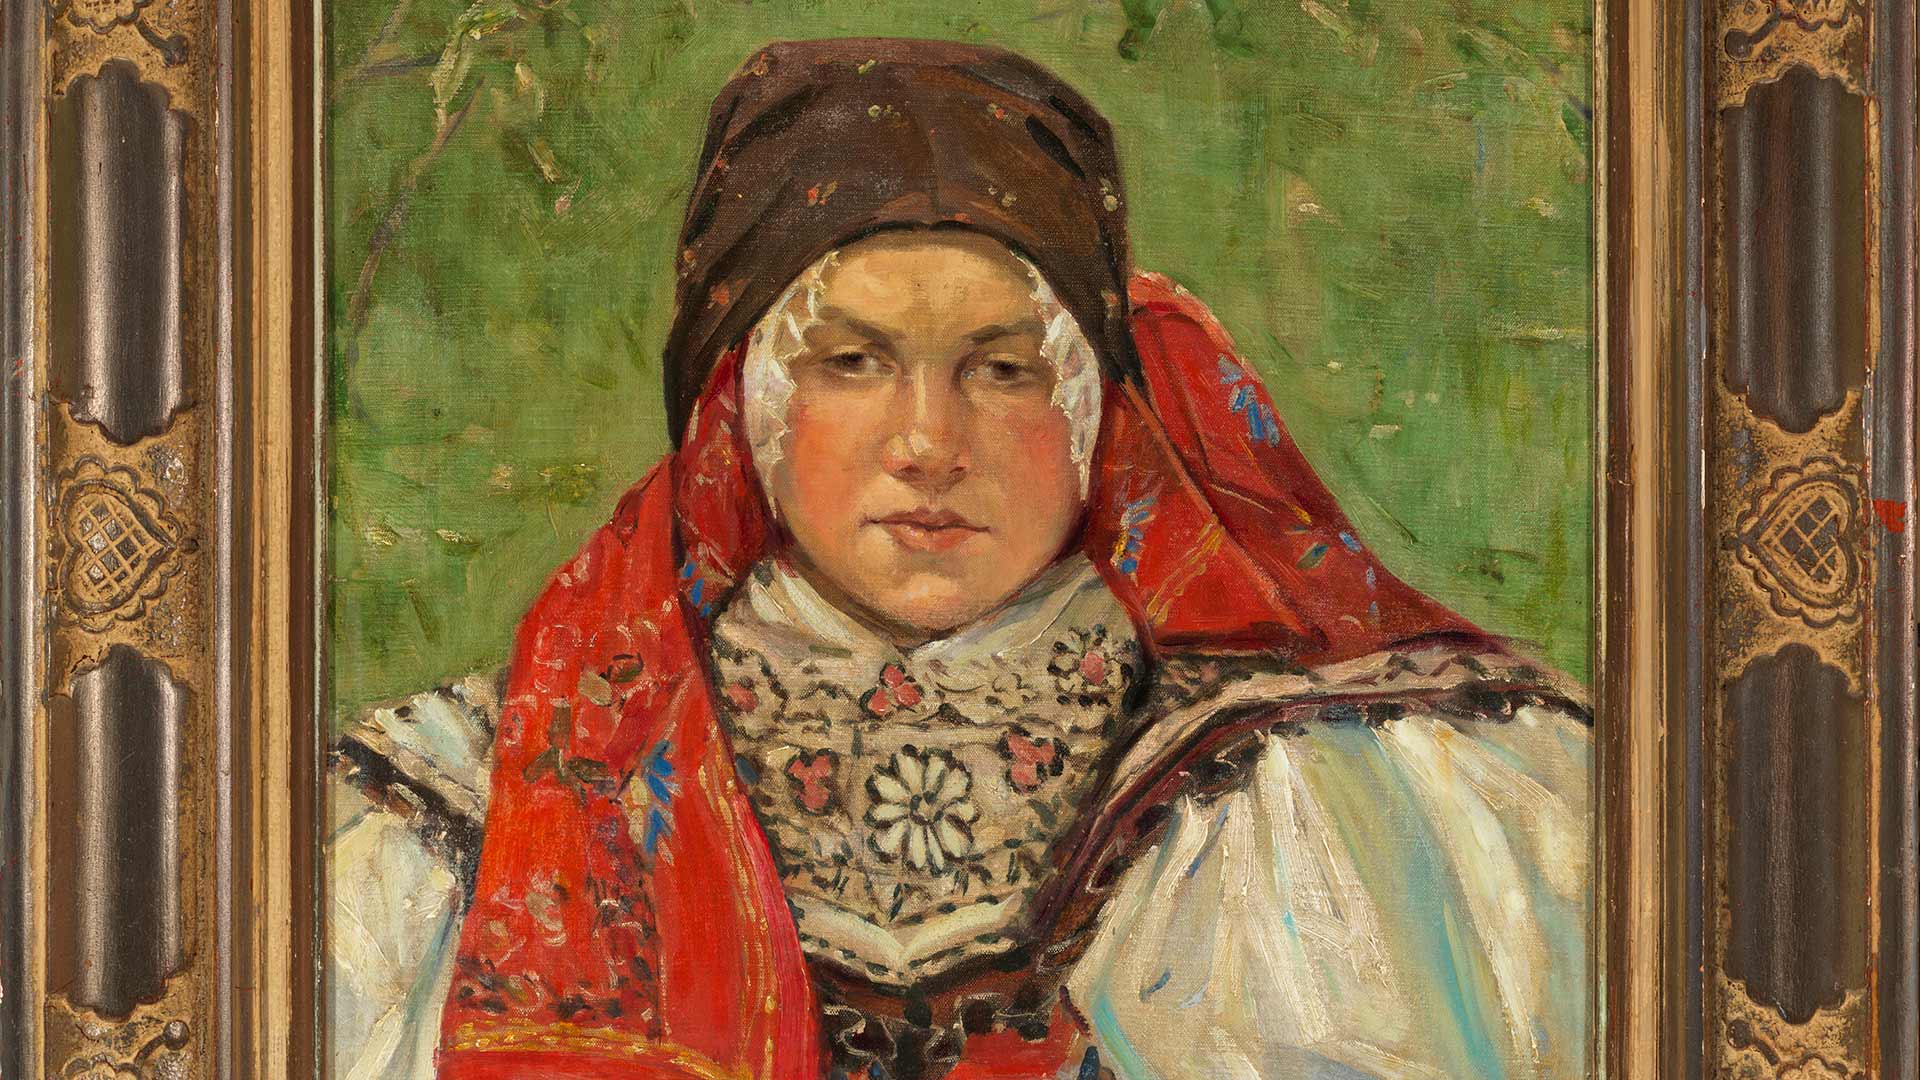 Painting of eastern european woman with red headscarf in a traditional outfit